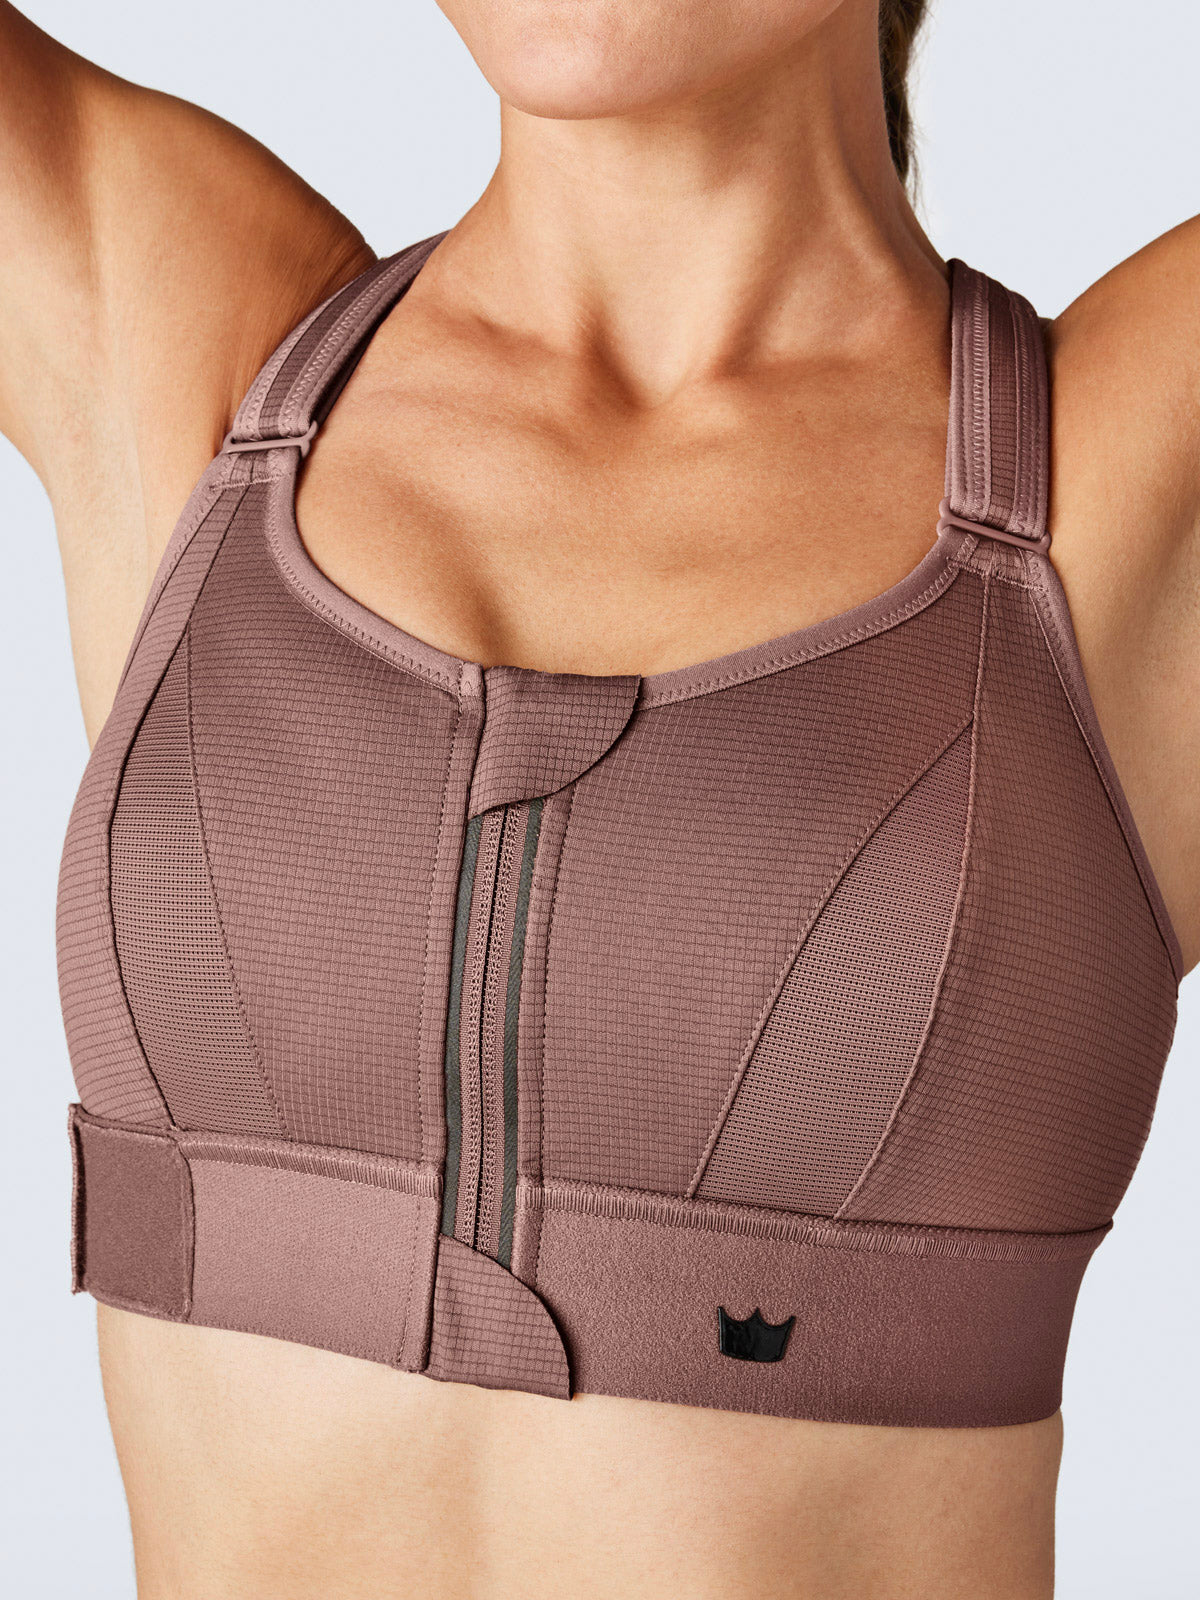 Women's Sports Supportive Sports Bras for Women Tank Top Gym Wirefree High  Support Push Up V Neck for Large Bust Cute Beige at  Women's Clothing  store